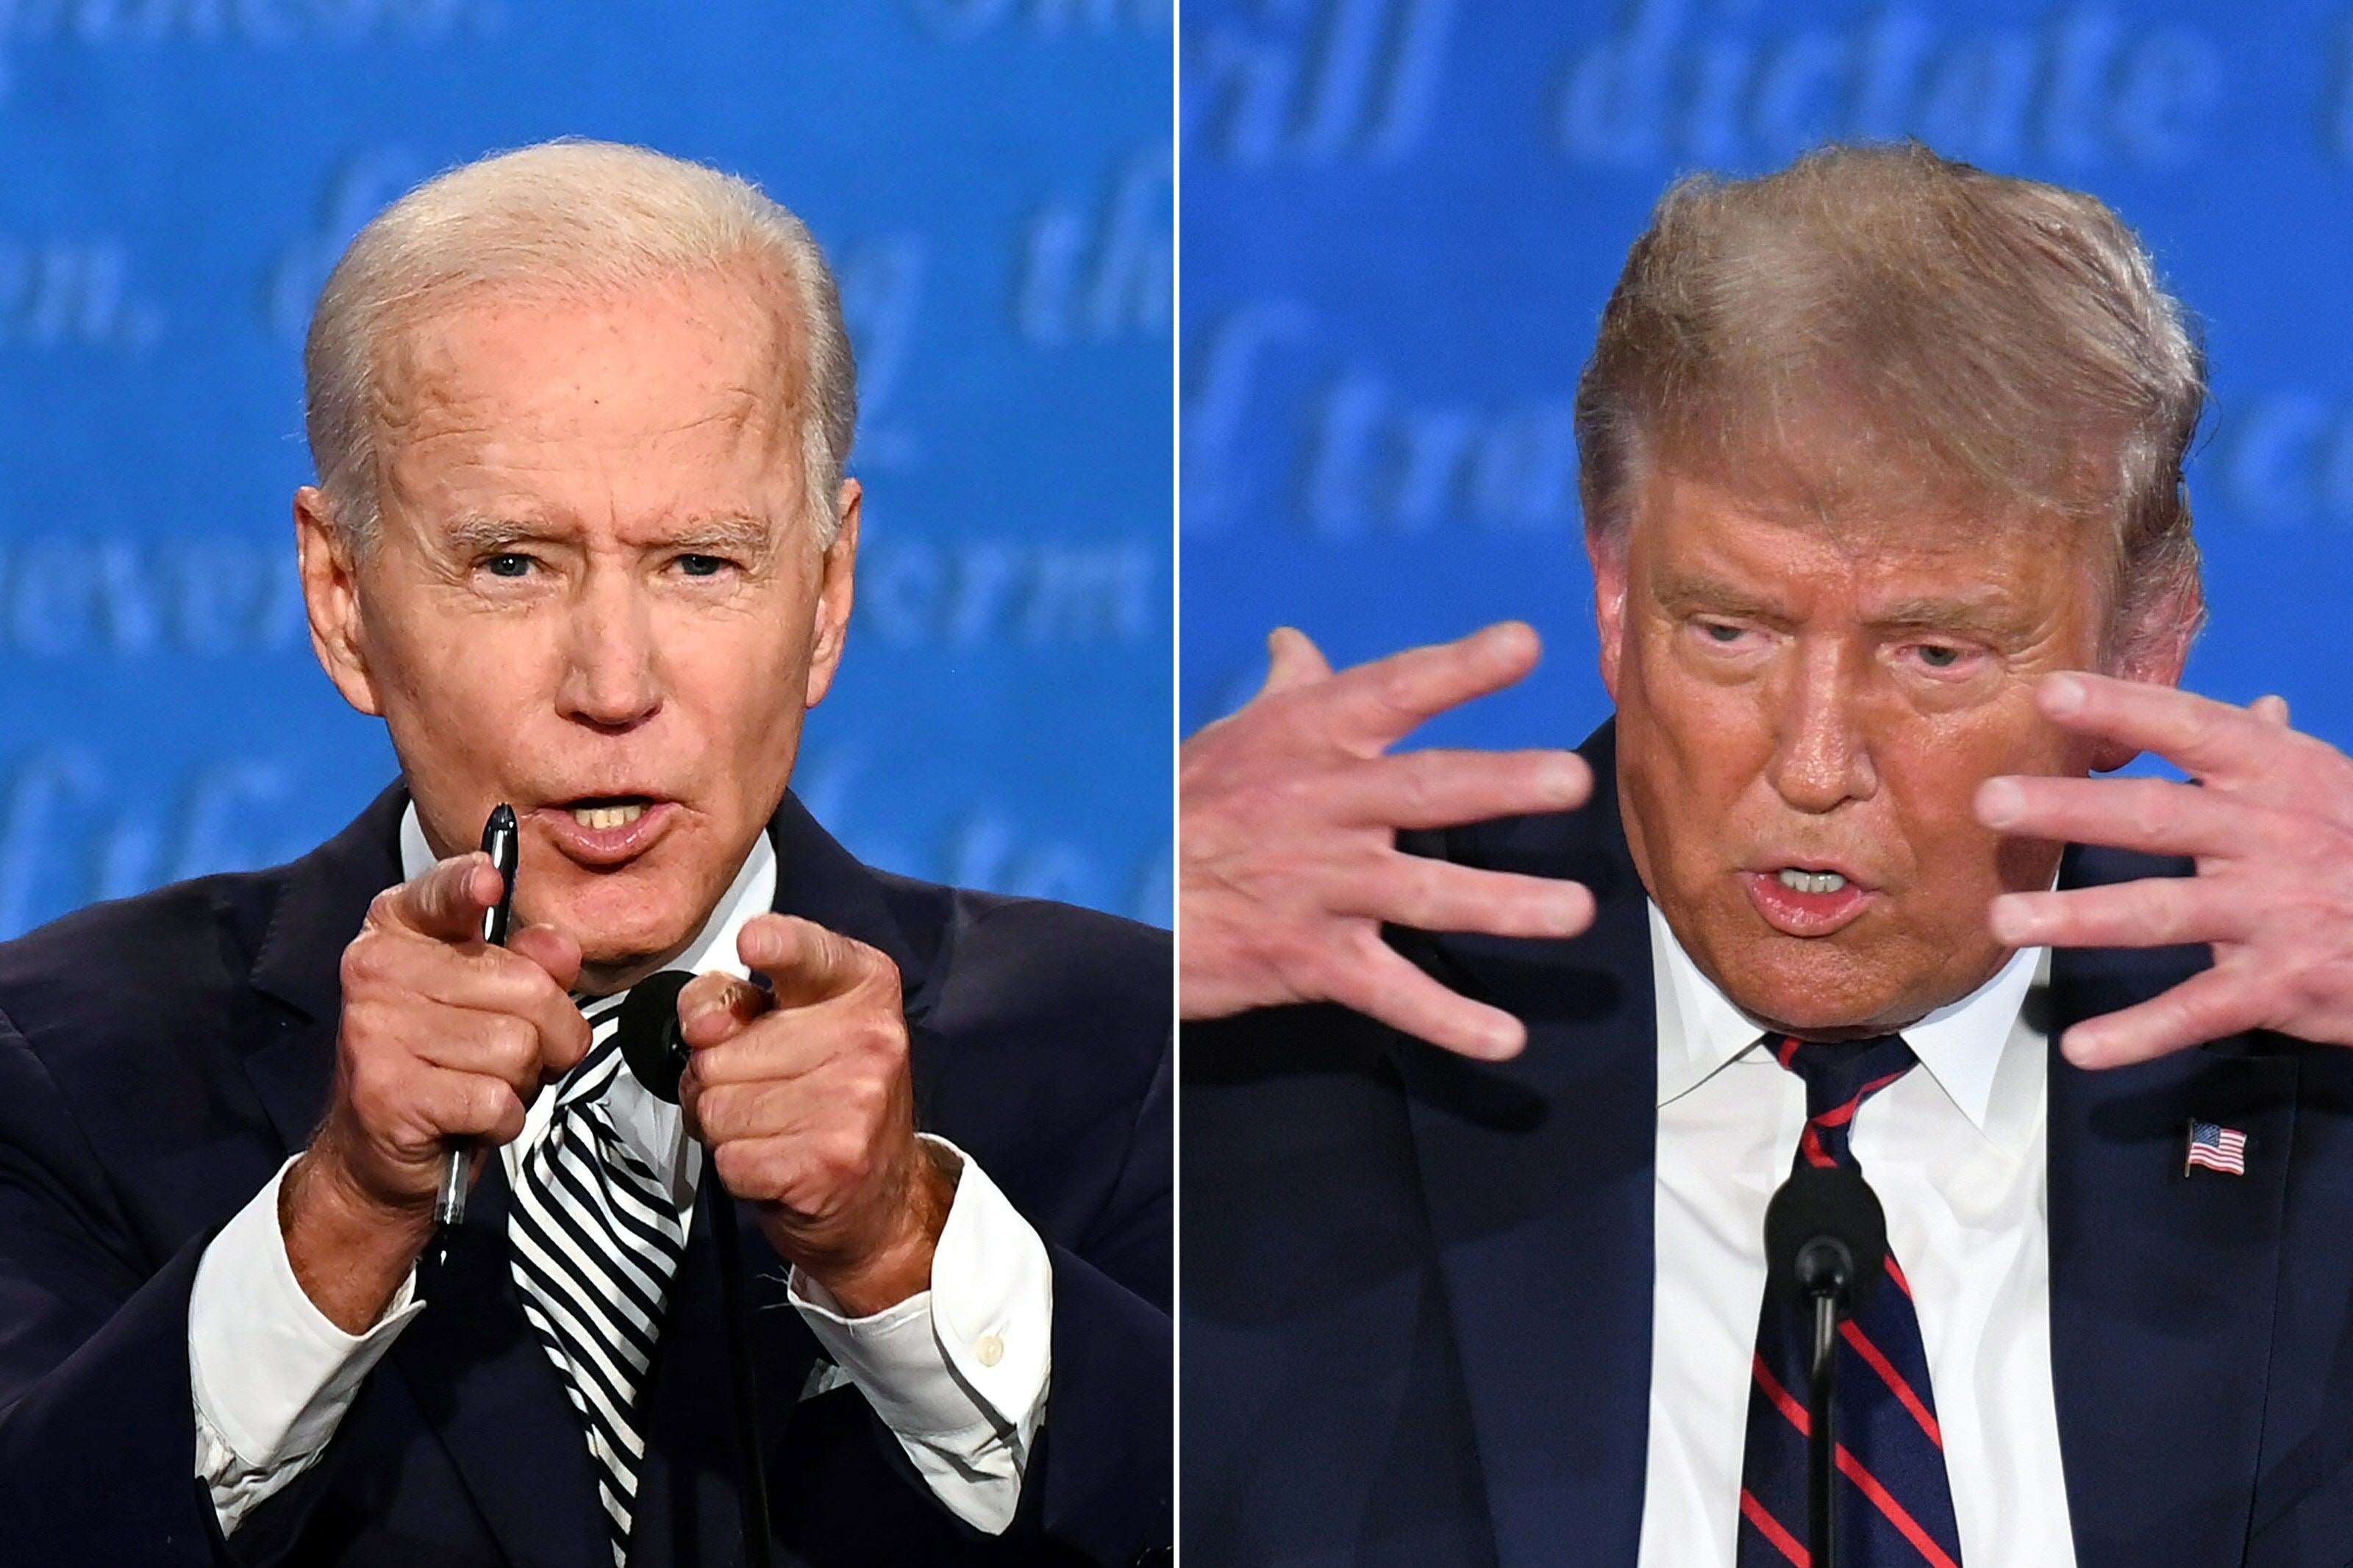 A split screen combination of pictures shows Joe Biden and Donald Trump speaking during the first presidential debate.